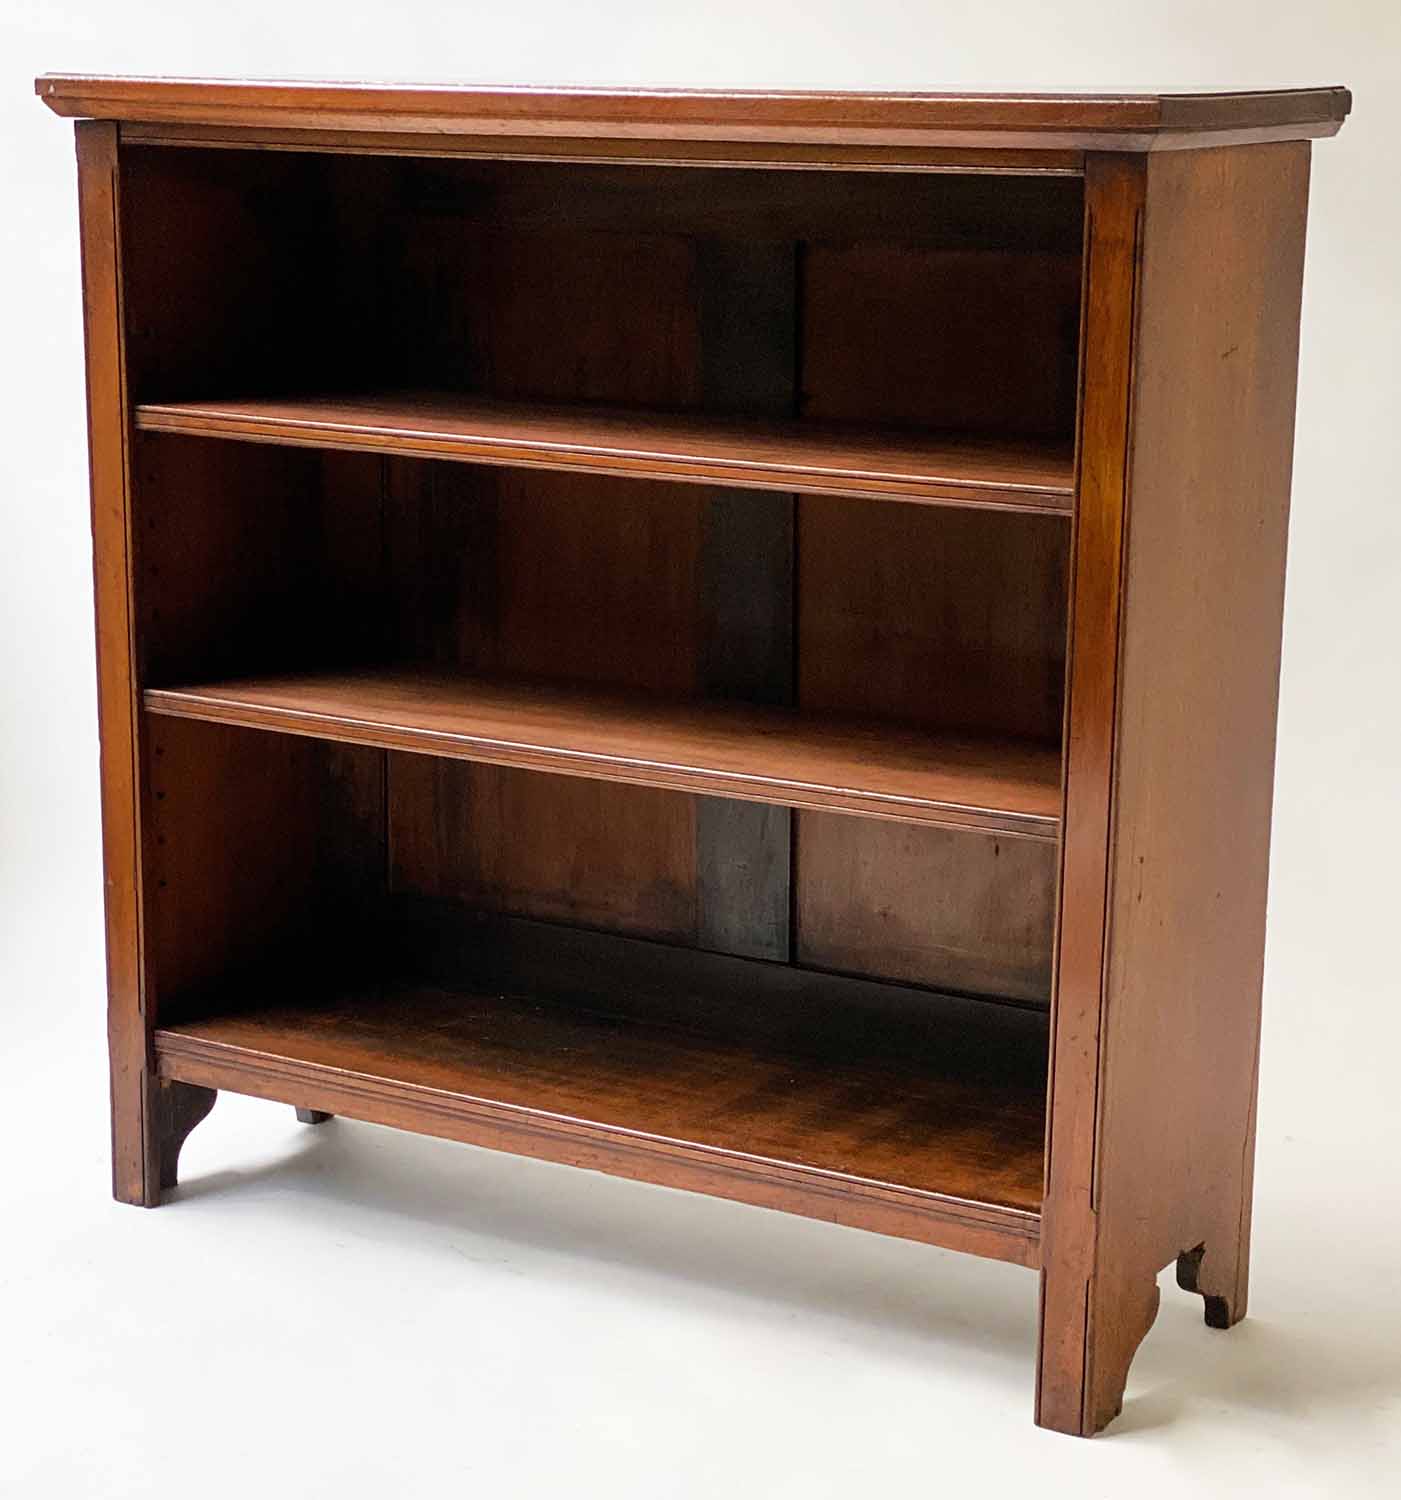 OPEN BOOKCASE, Victorian solid walnut rectangular with two adjustable shelves,